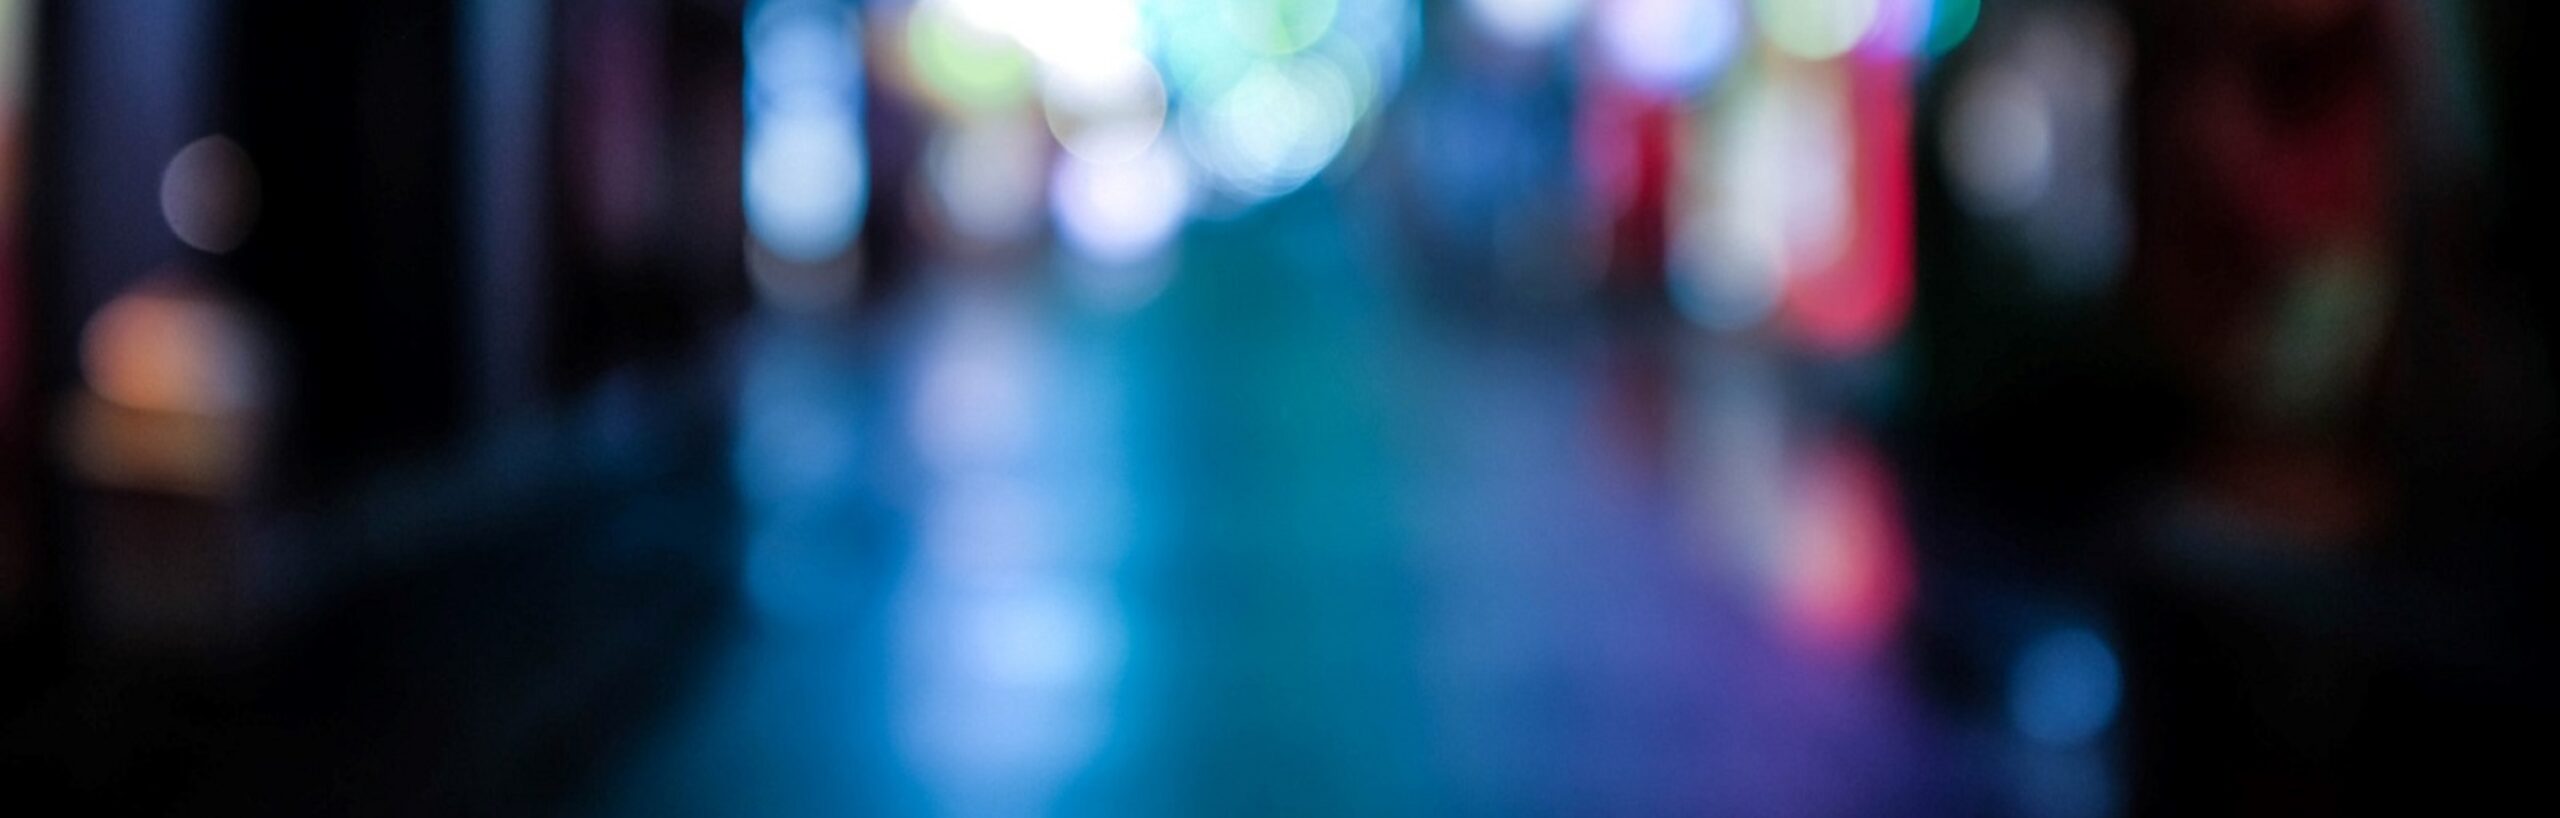 Abstract coloured lights (bokeh) in a city